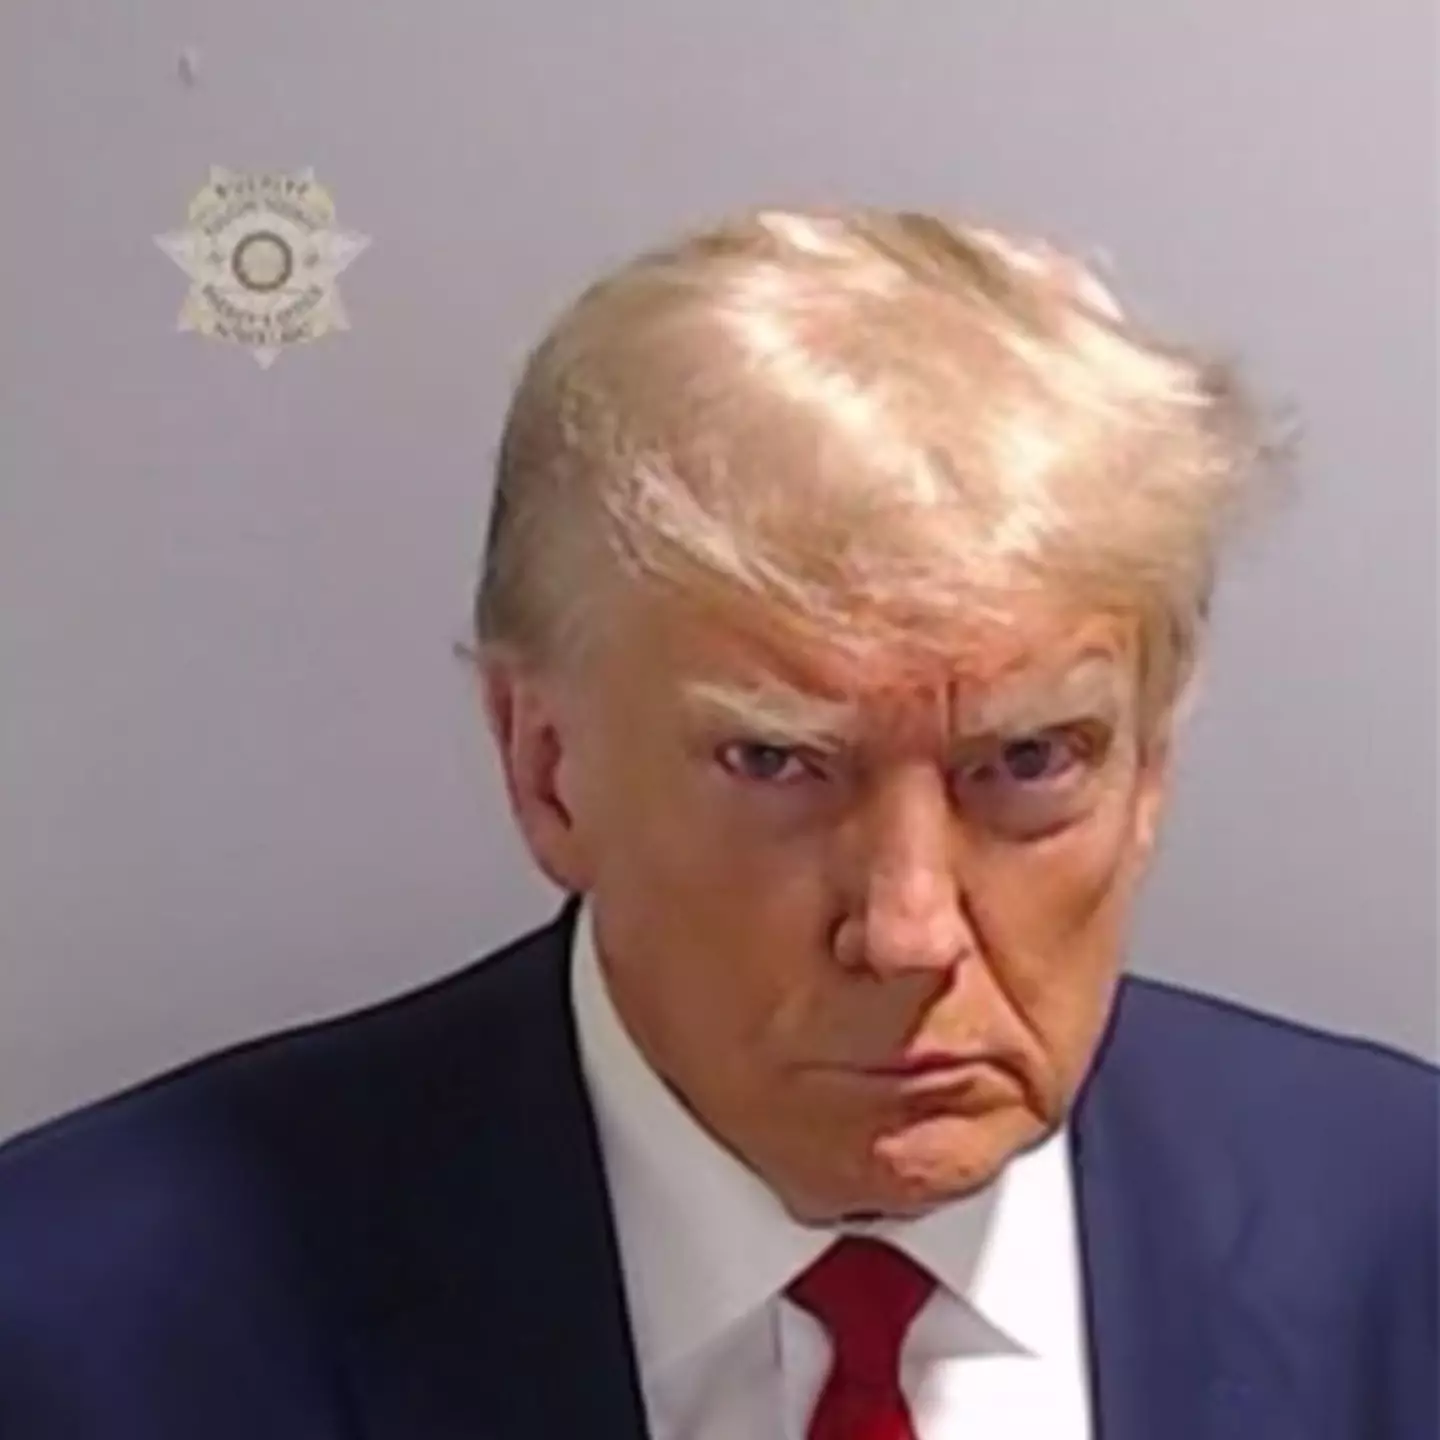 Donald Trump handed himself in to Fulton County Sheriff's Office.